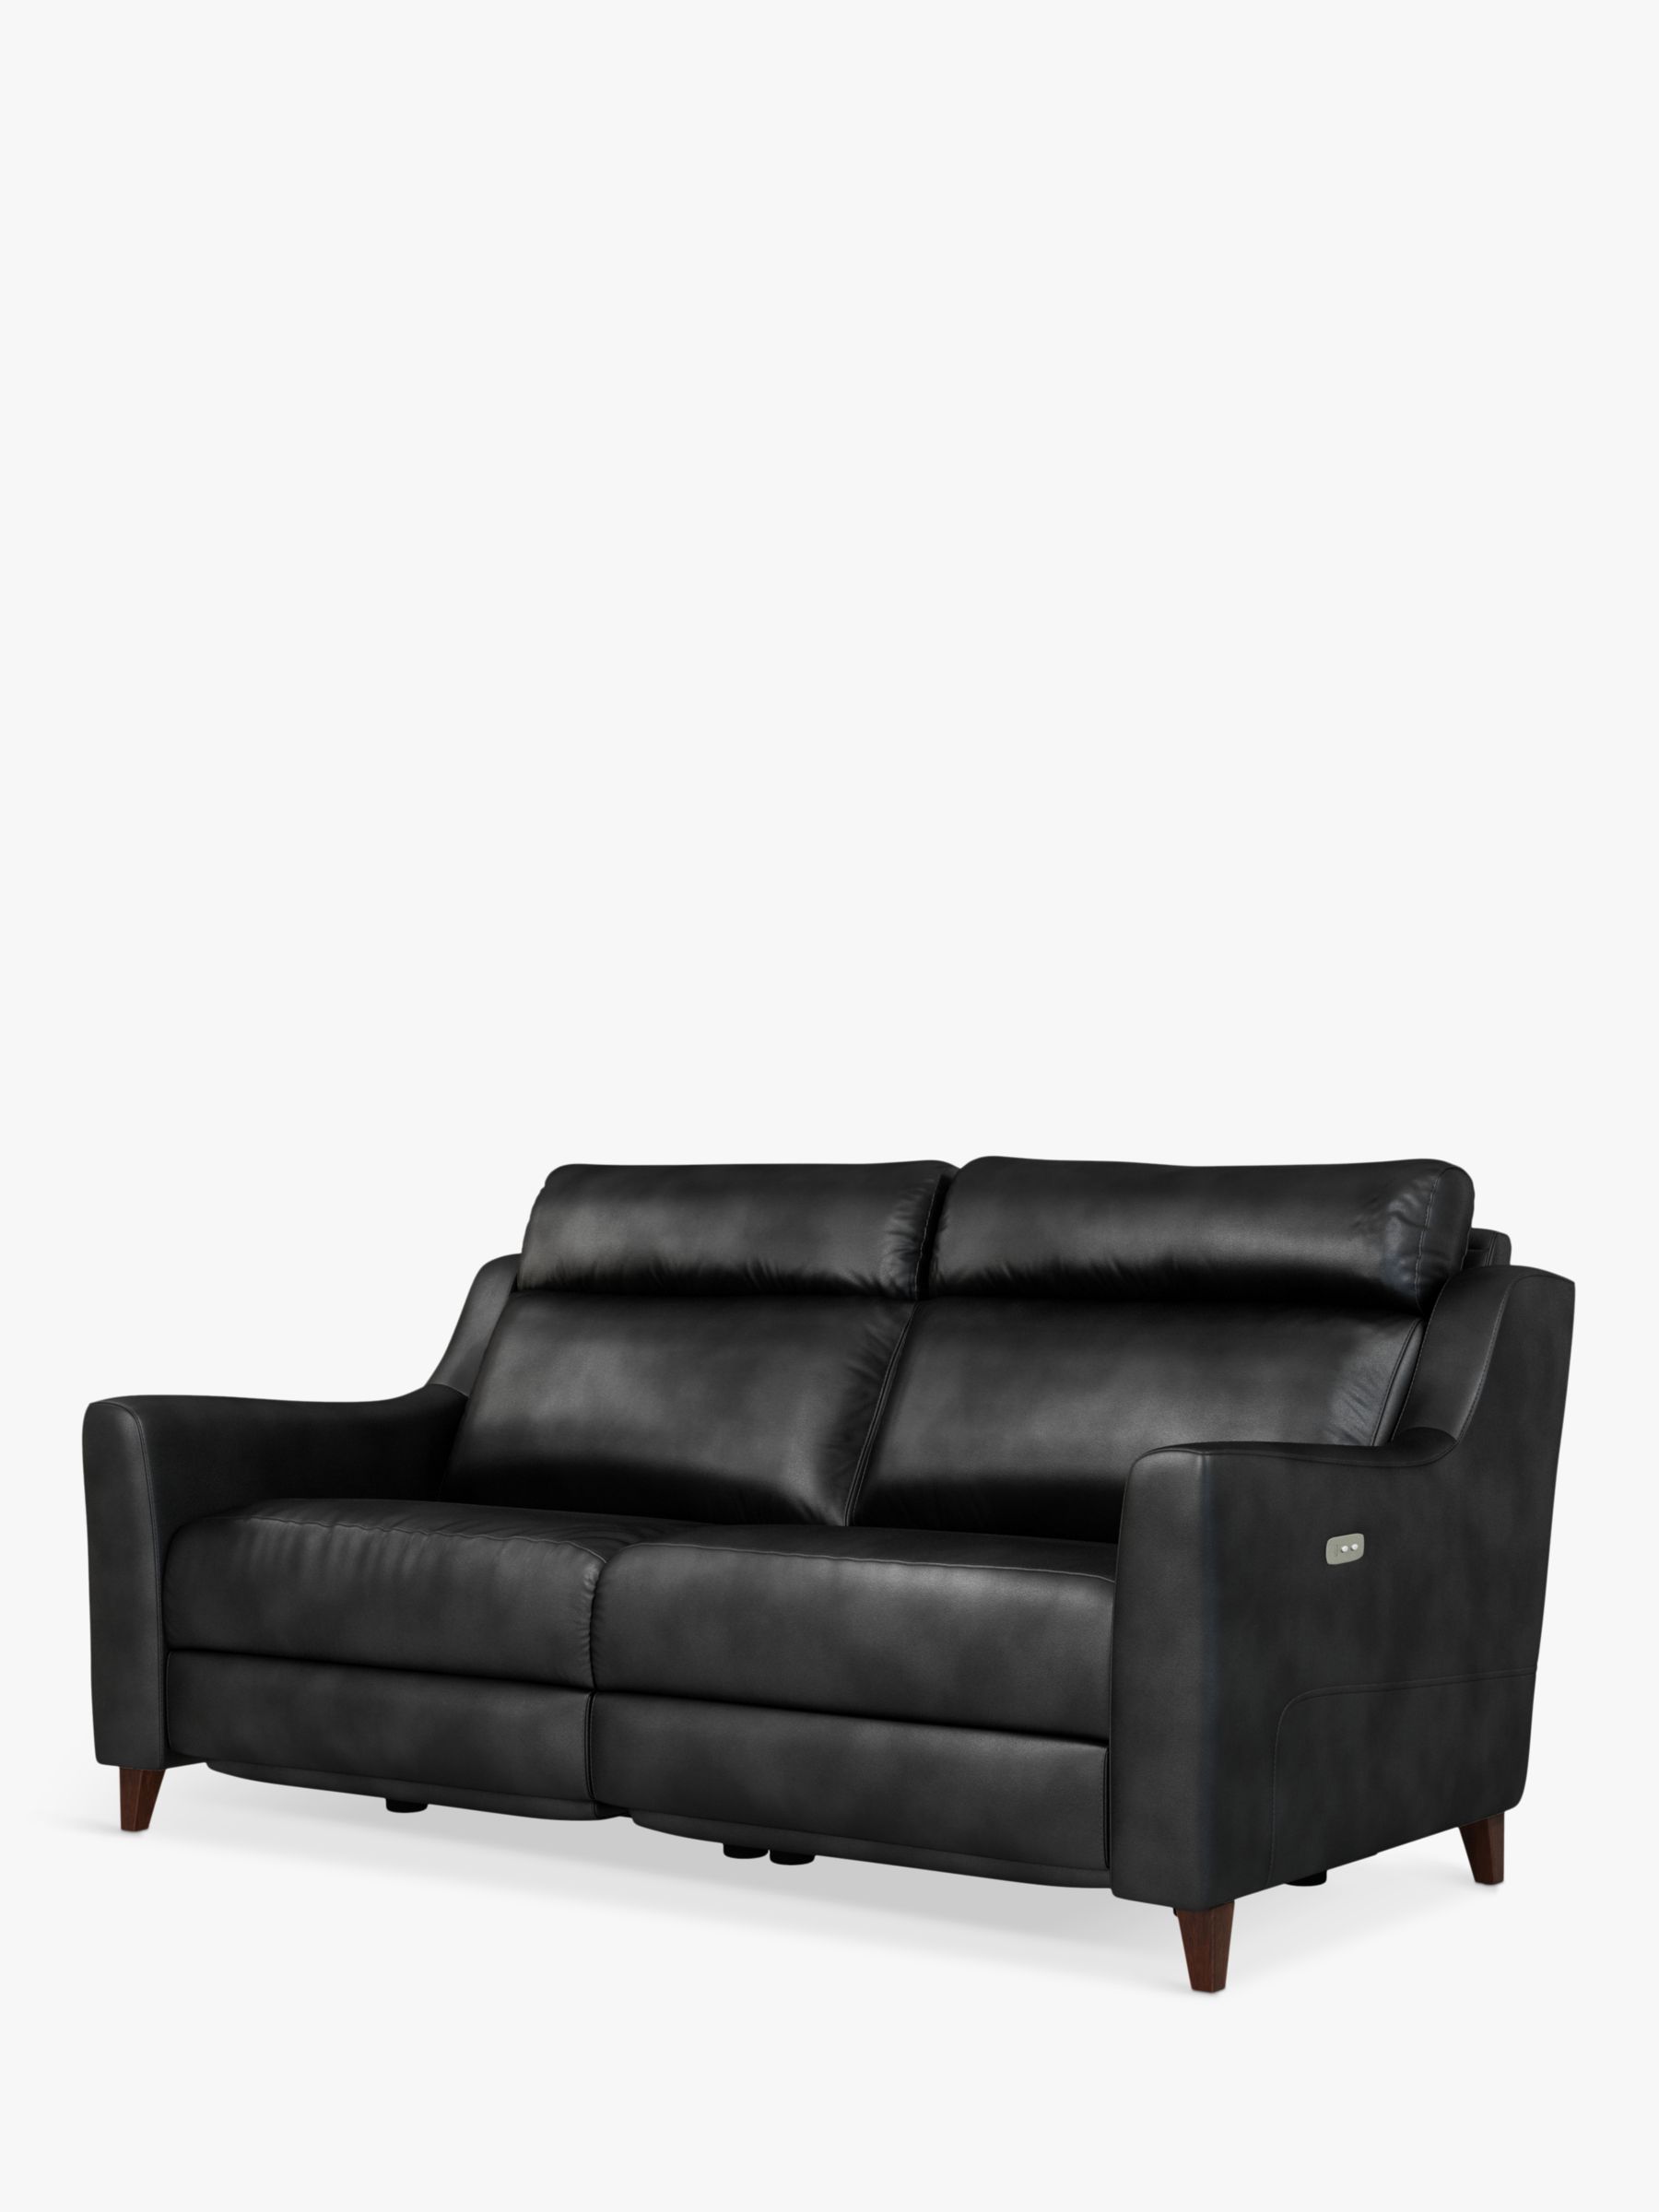 2 Seater Power Recliner Leather Sofa, Sofa Leather Recliner